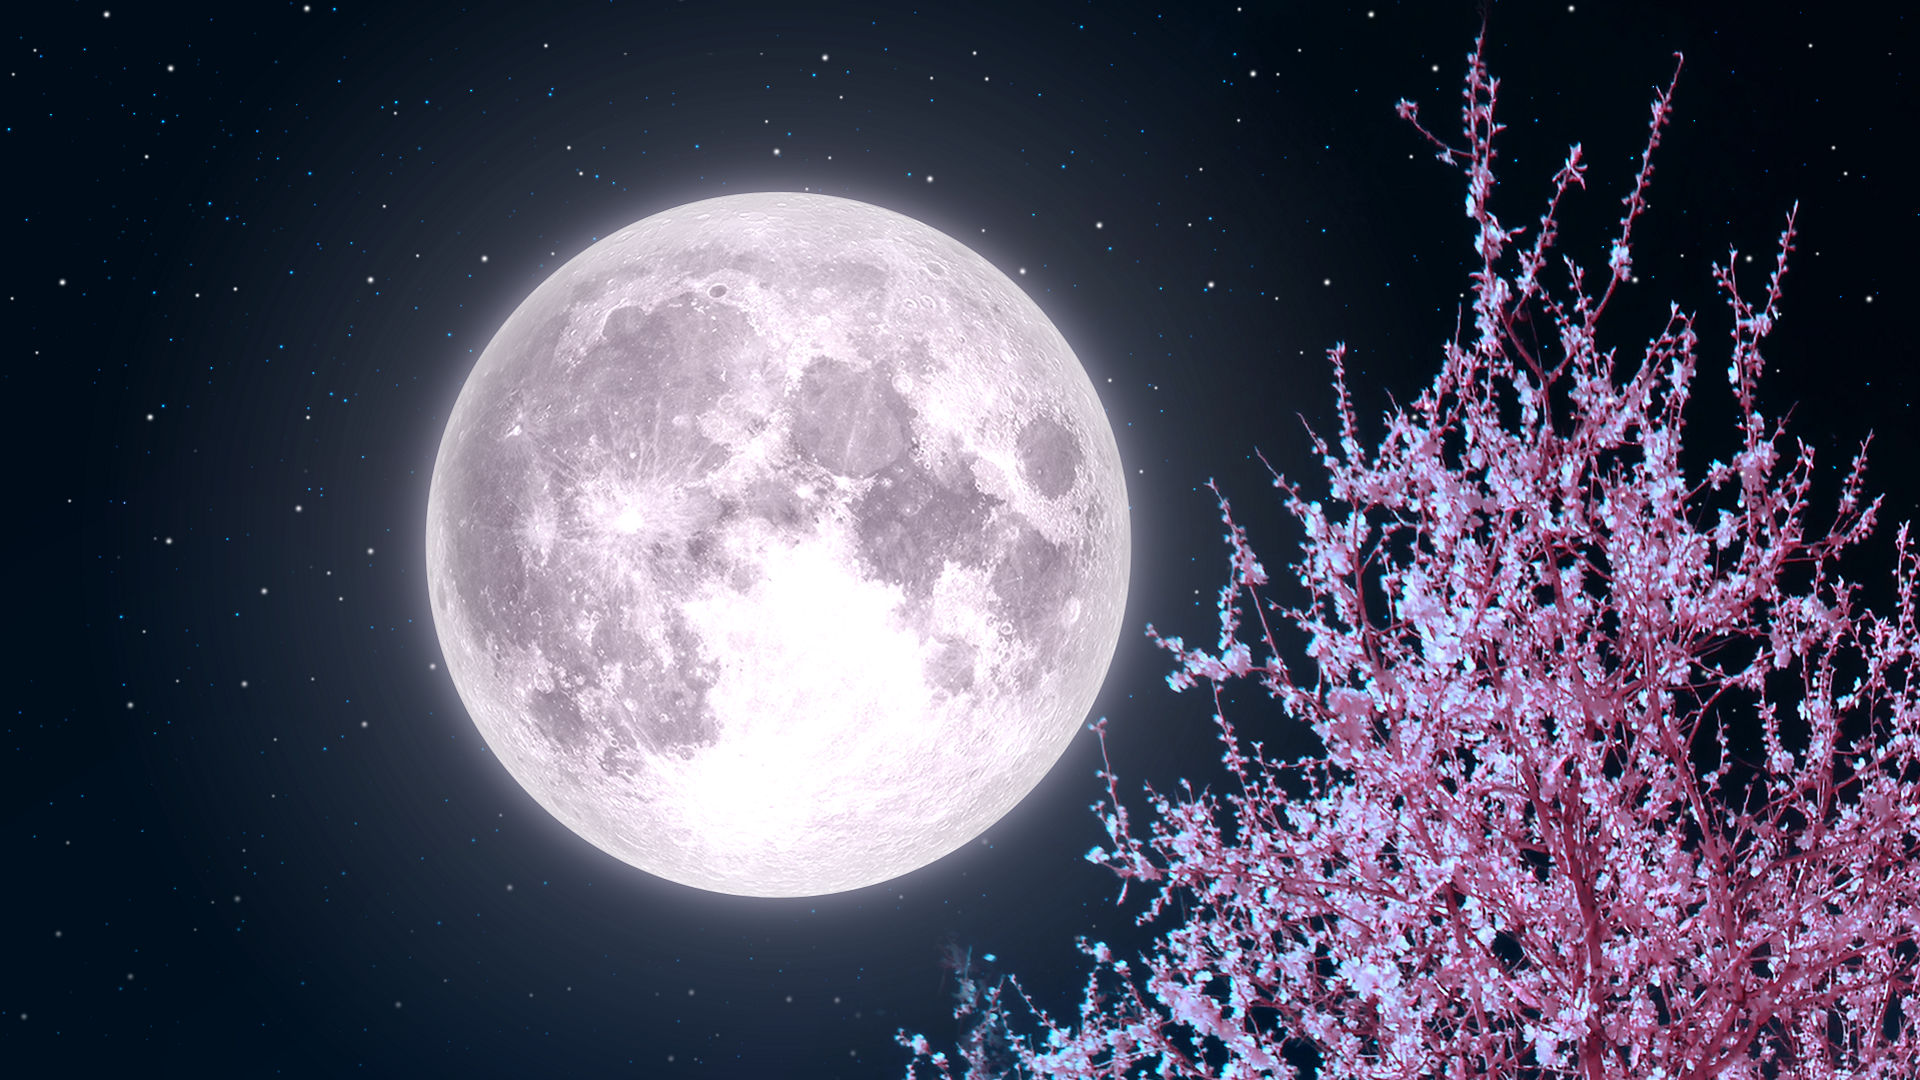 Starry Moon Night 2020 Wallpapers